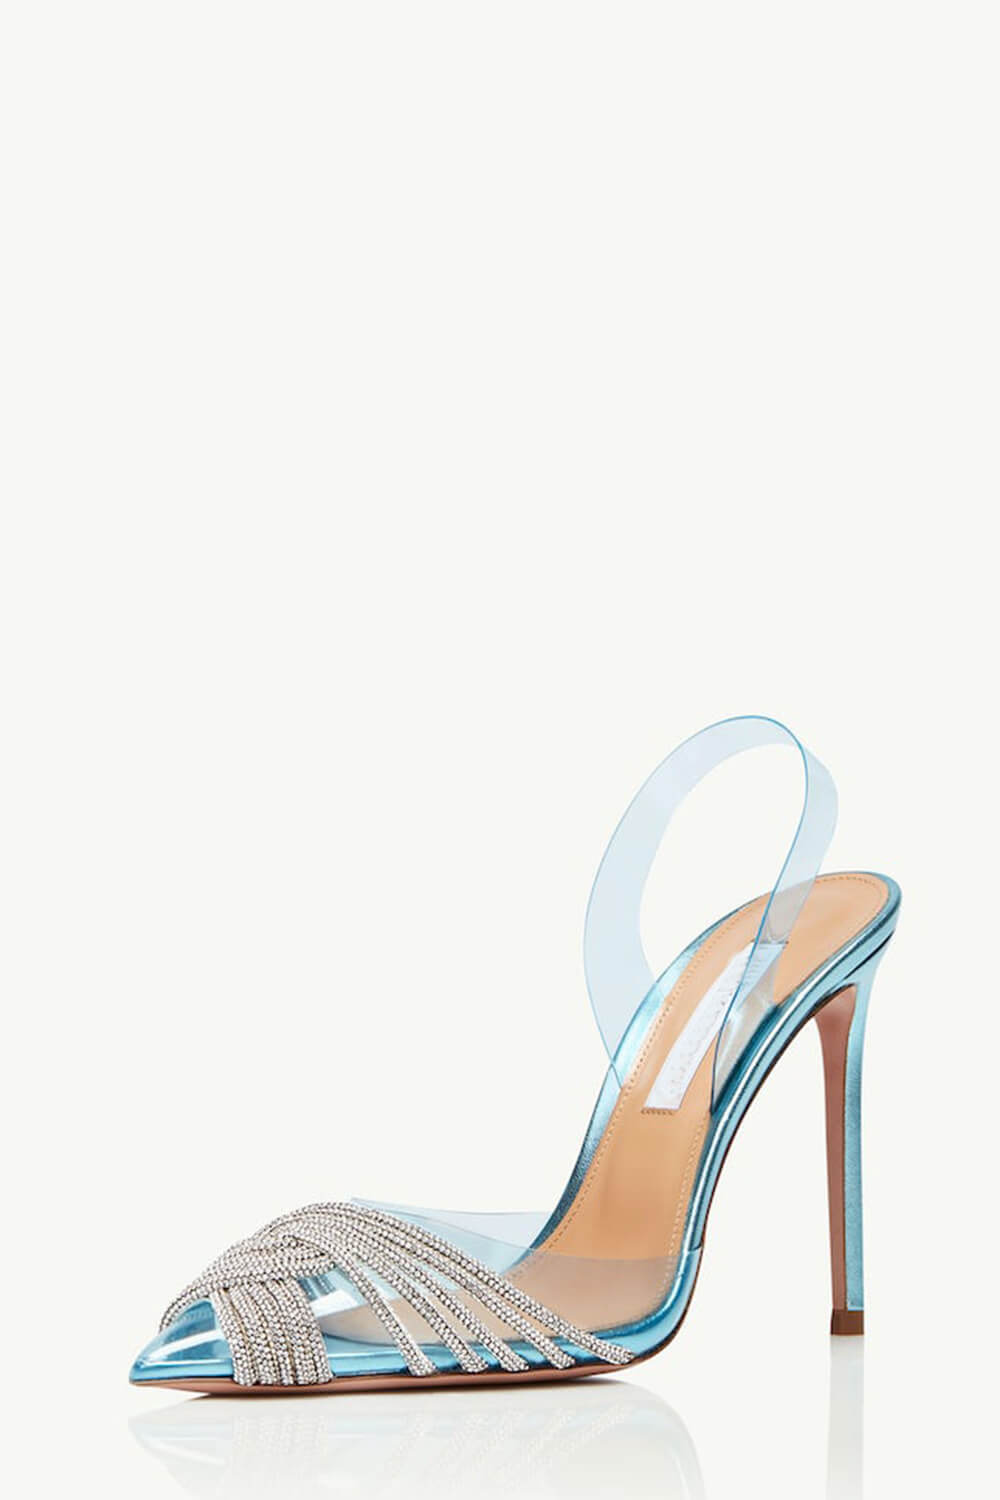 Holographic Clear Crossover Diamante Pointed Toe Perspex Slingback Stiletto Heels - Blue